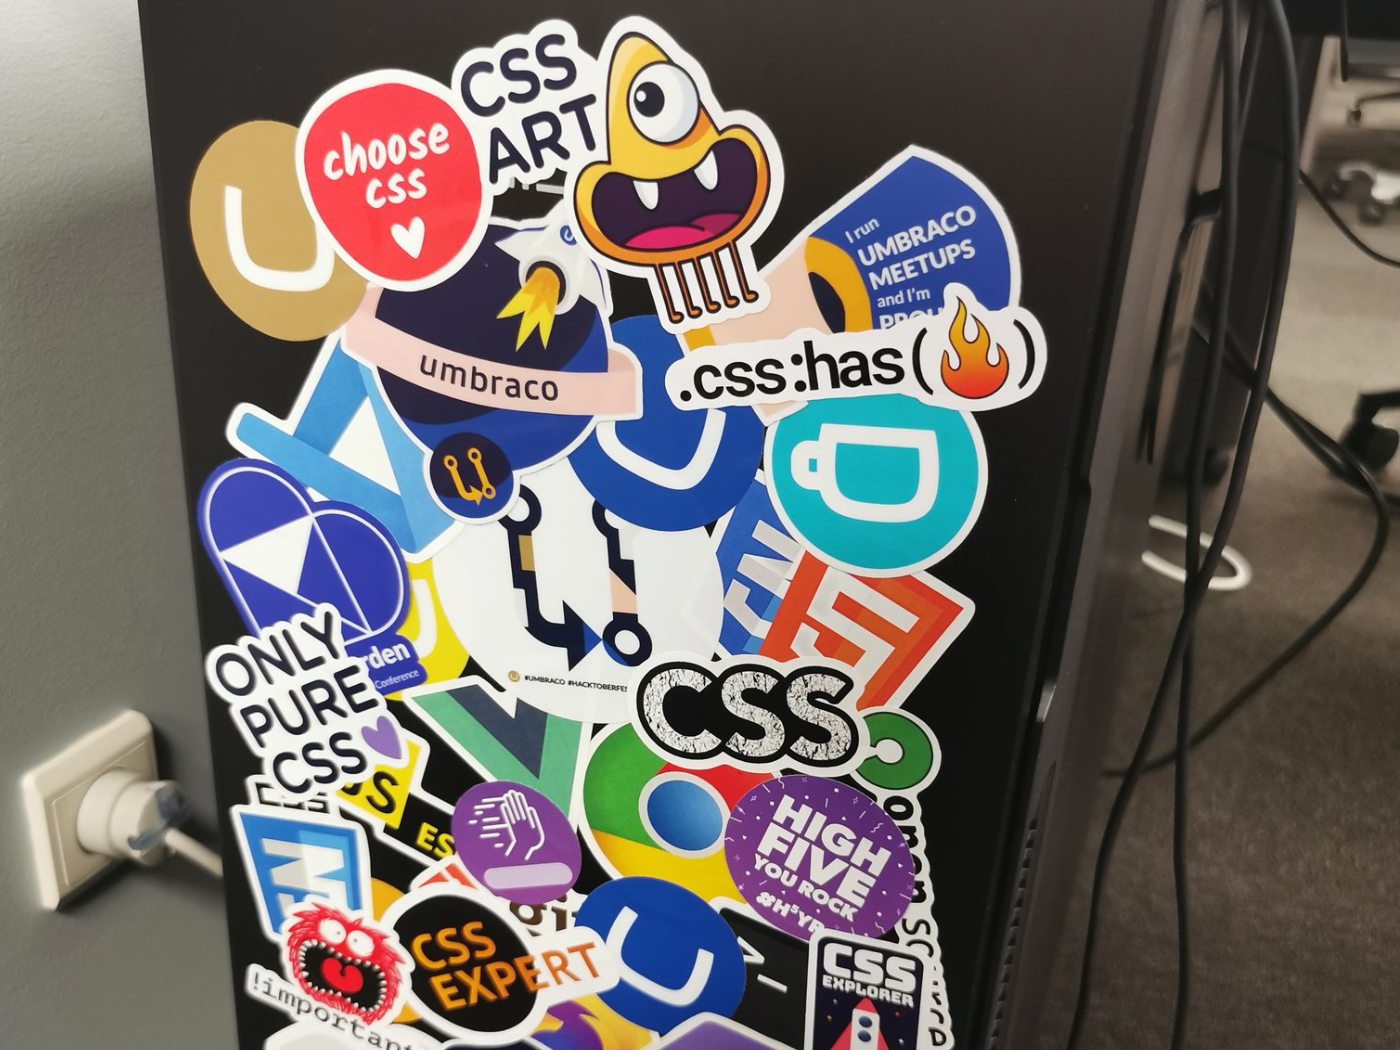 Søren Kottal's computer with a bunch of stickers, including a number of CSS-themed stickers.